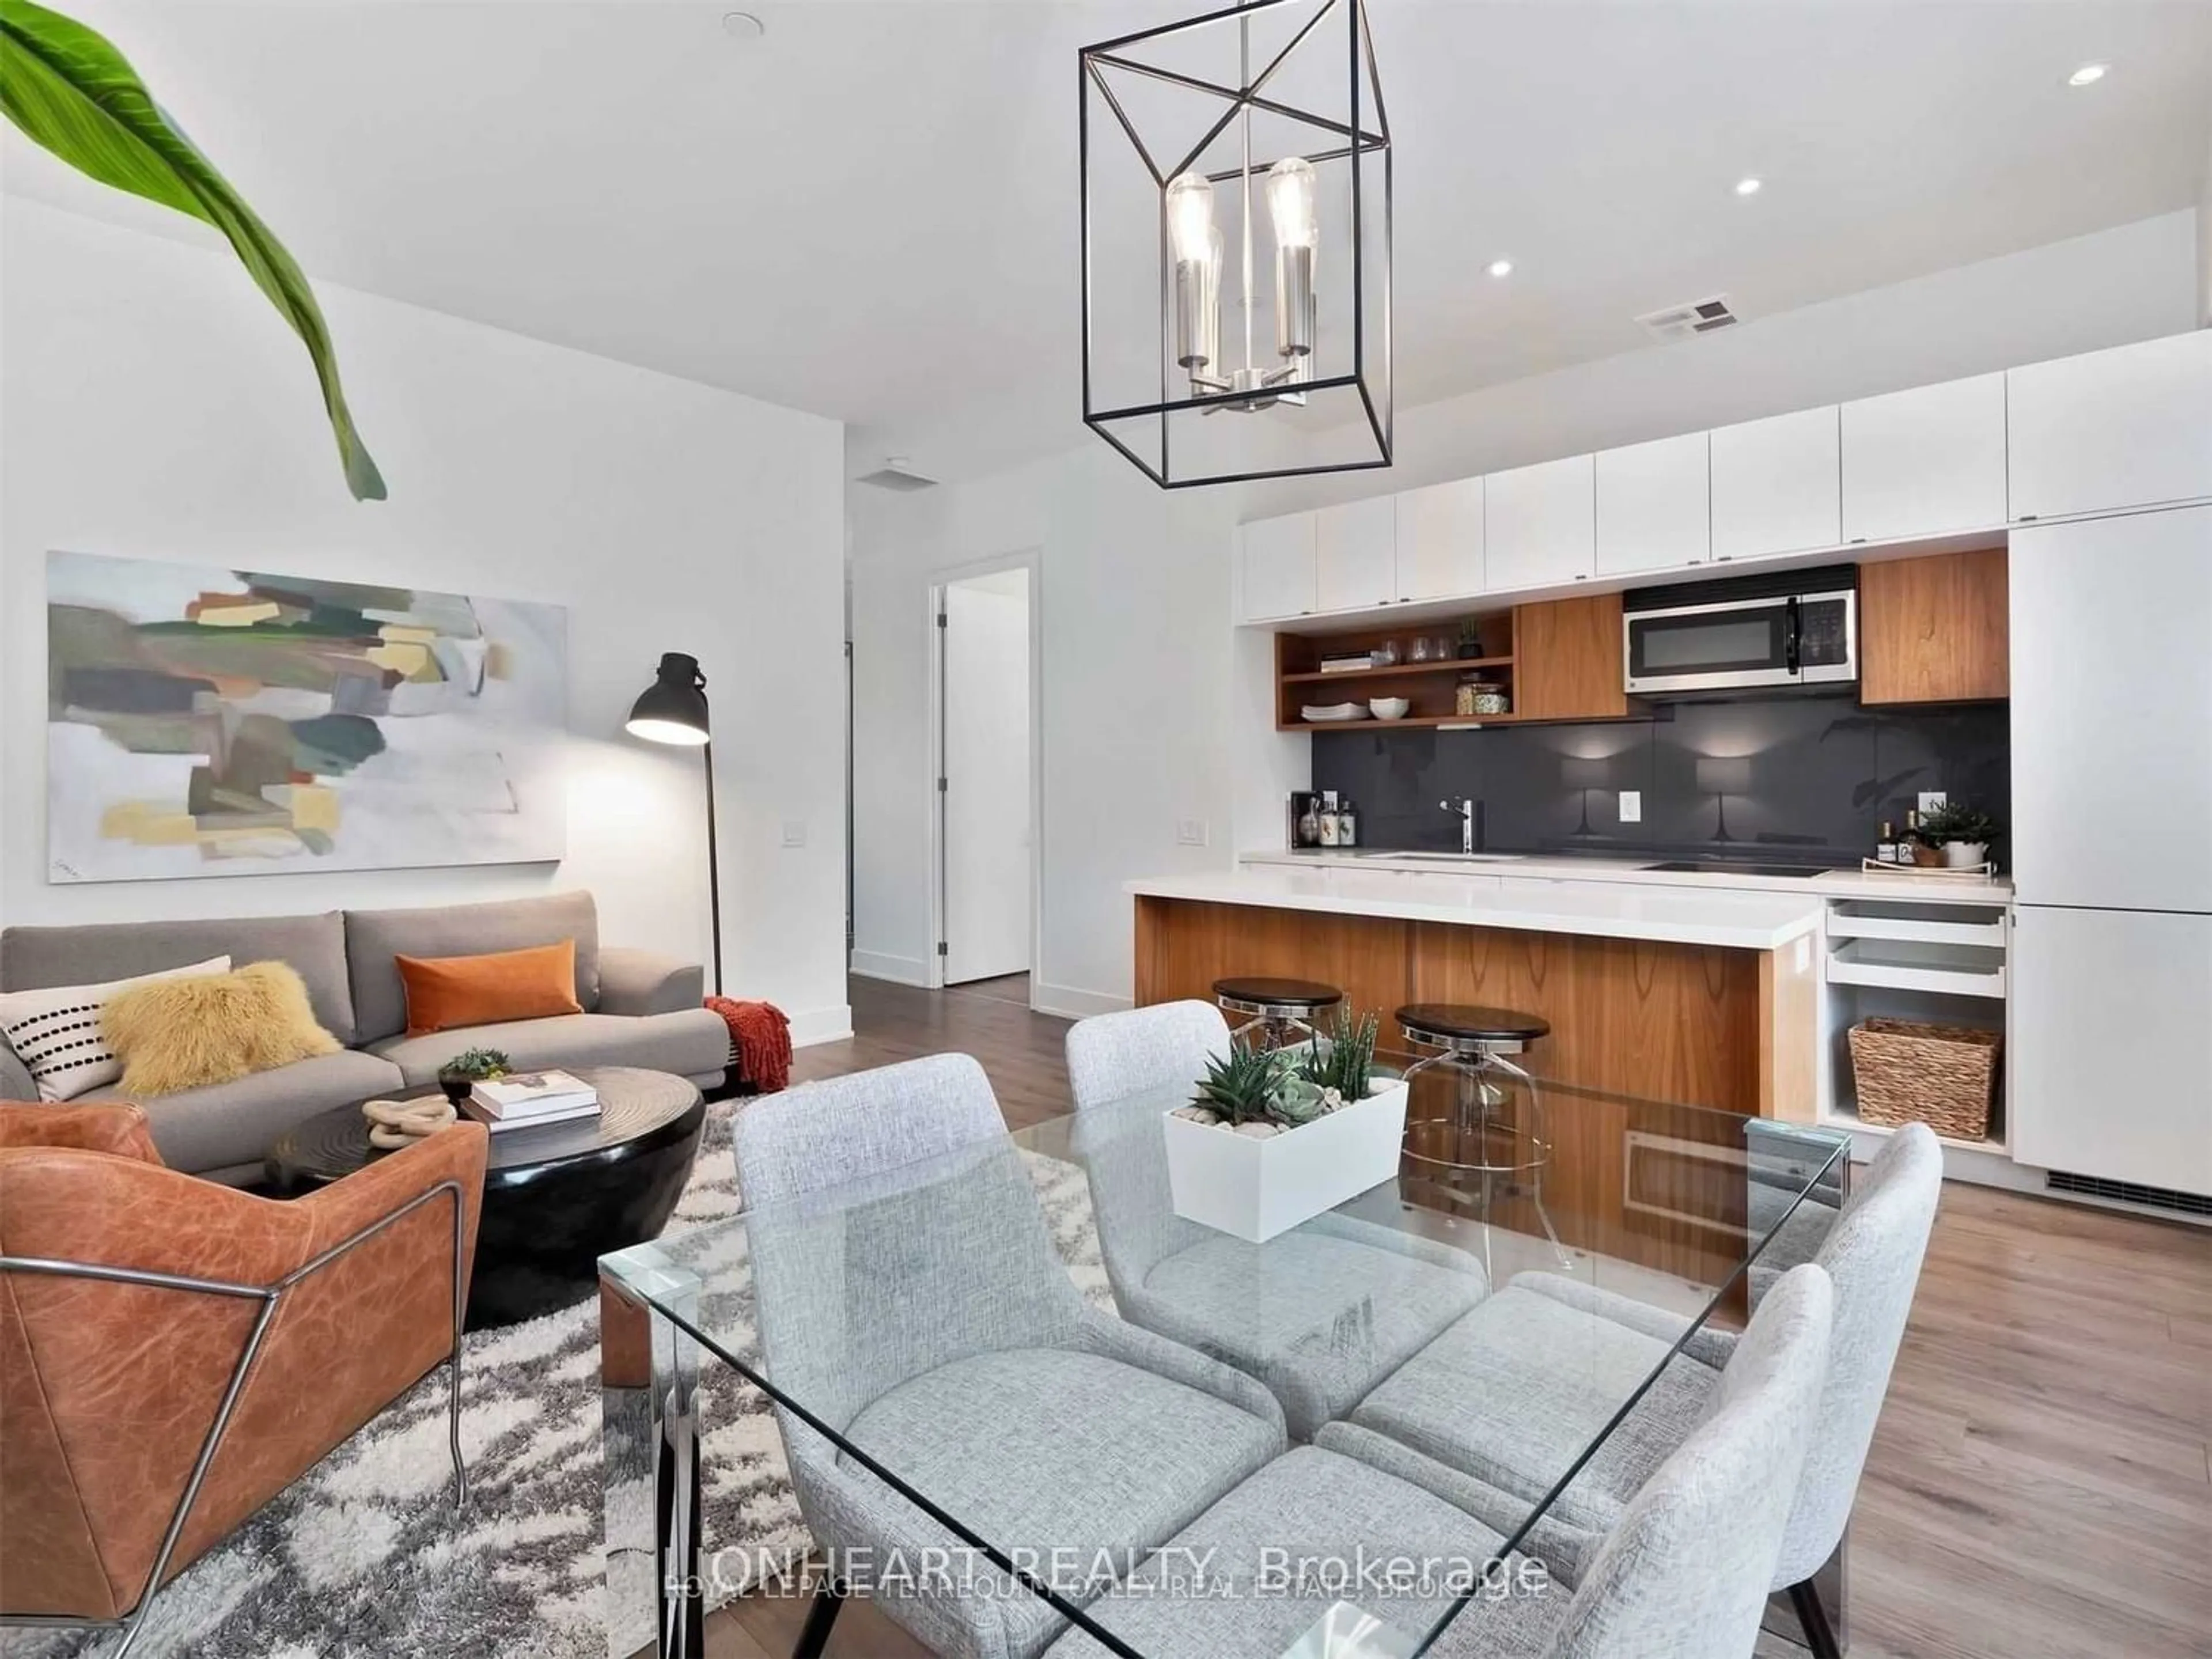 Contemporary kitchen for 111 St Clair Ave #605, Toronto Ontario M4V 1N5